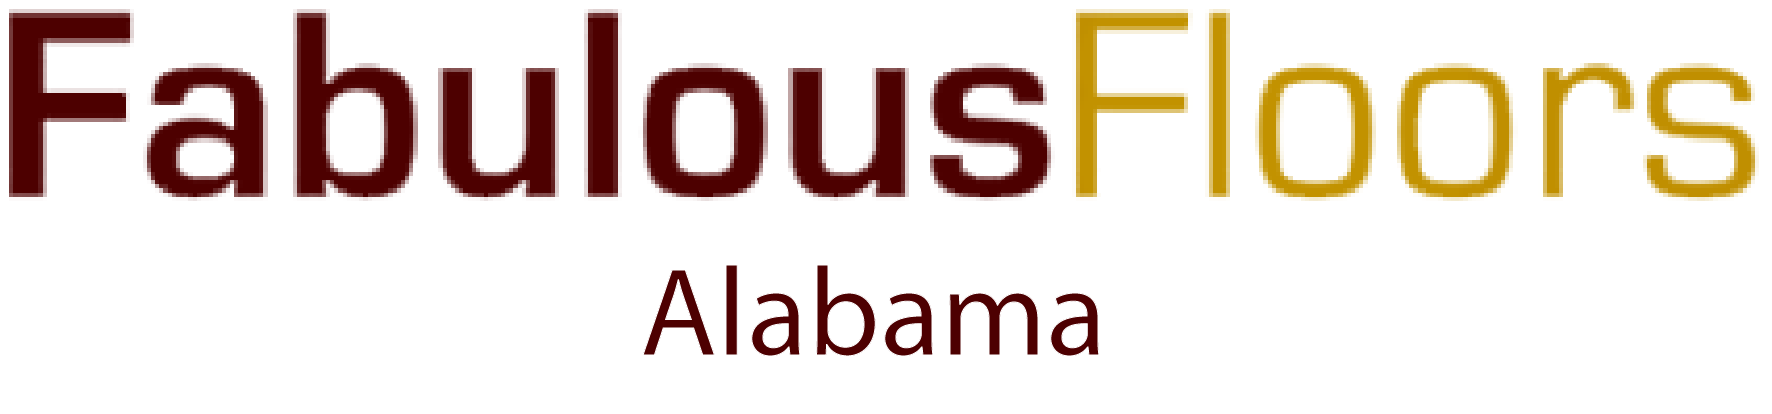 Fabulous Floors Alabama services all of Birmingham, Tuscaloosa, and the surrounding areas